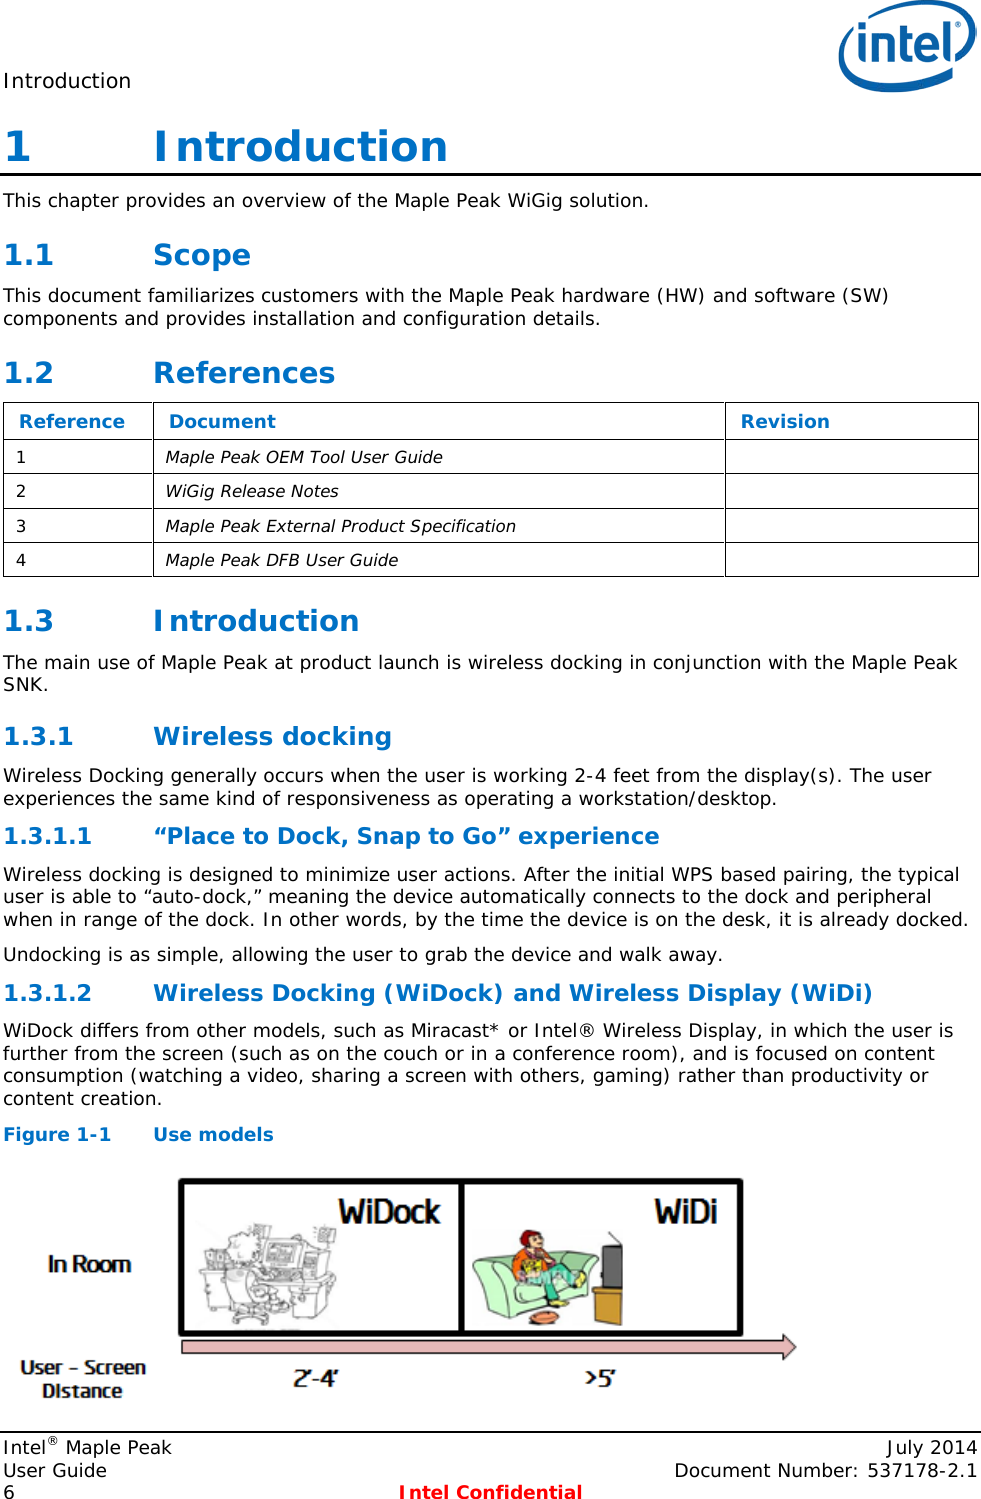 Introduction   1   Introduction This chapter provides an overview of the Maple Peak WiGig solution. 1.1 Scope This document familiarizes customers with the Maple Peak hardware (HW) and software (SW) components and provides installation and configuration details. 1.2 References Reference Document Revision 1  Maple Peak OEM Tool User Guide   2  WiGig Release Notes  3  Maple Peak External Product Specification  4  Maple Peak DFB User Guide   1.3 Introduction The main use of Maple Peak at product launch is wireless docking in conjunction with the Maple Peak SNK. 1.3.1 Wireless docking Wireless Docking generally occurs when the user is working 2-4 feet from the display(s). The user experiences the same kind of responsiveness as operating a workstation/desktop.  “Place to Dock, Snap to Go” experience 1.3.1.1Wireless docking is designed to minimize user actions. After the initial WPS based pairing, the typical user is able to “auto-dock,” meaning the device automatically connects to the dock and peripheral when in range of the dock. In other words, by the time the device is on the desk, it is already docked. Undocking is as simple, allowing the user to grab the device and walk away.  Wireless Docking (WiDock) and Wireless Display (WiDi) 1.3.1.2WiDock differs from other models, such as Miracast* or Intel® Wireless Display, in which the user is further from the screen (such as on the couch or in a conference room), and is focused on content consumption (watching a video, sharing a screen with others, gaming) rather than productivity or content creation. Figure 1-1  Use models  Intel® Maple Peak    July 2014 User Guide    Document Number: 537178-2.1 6  Intel Confidential   